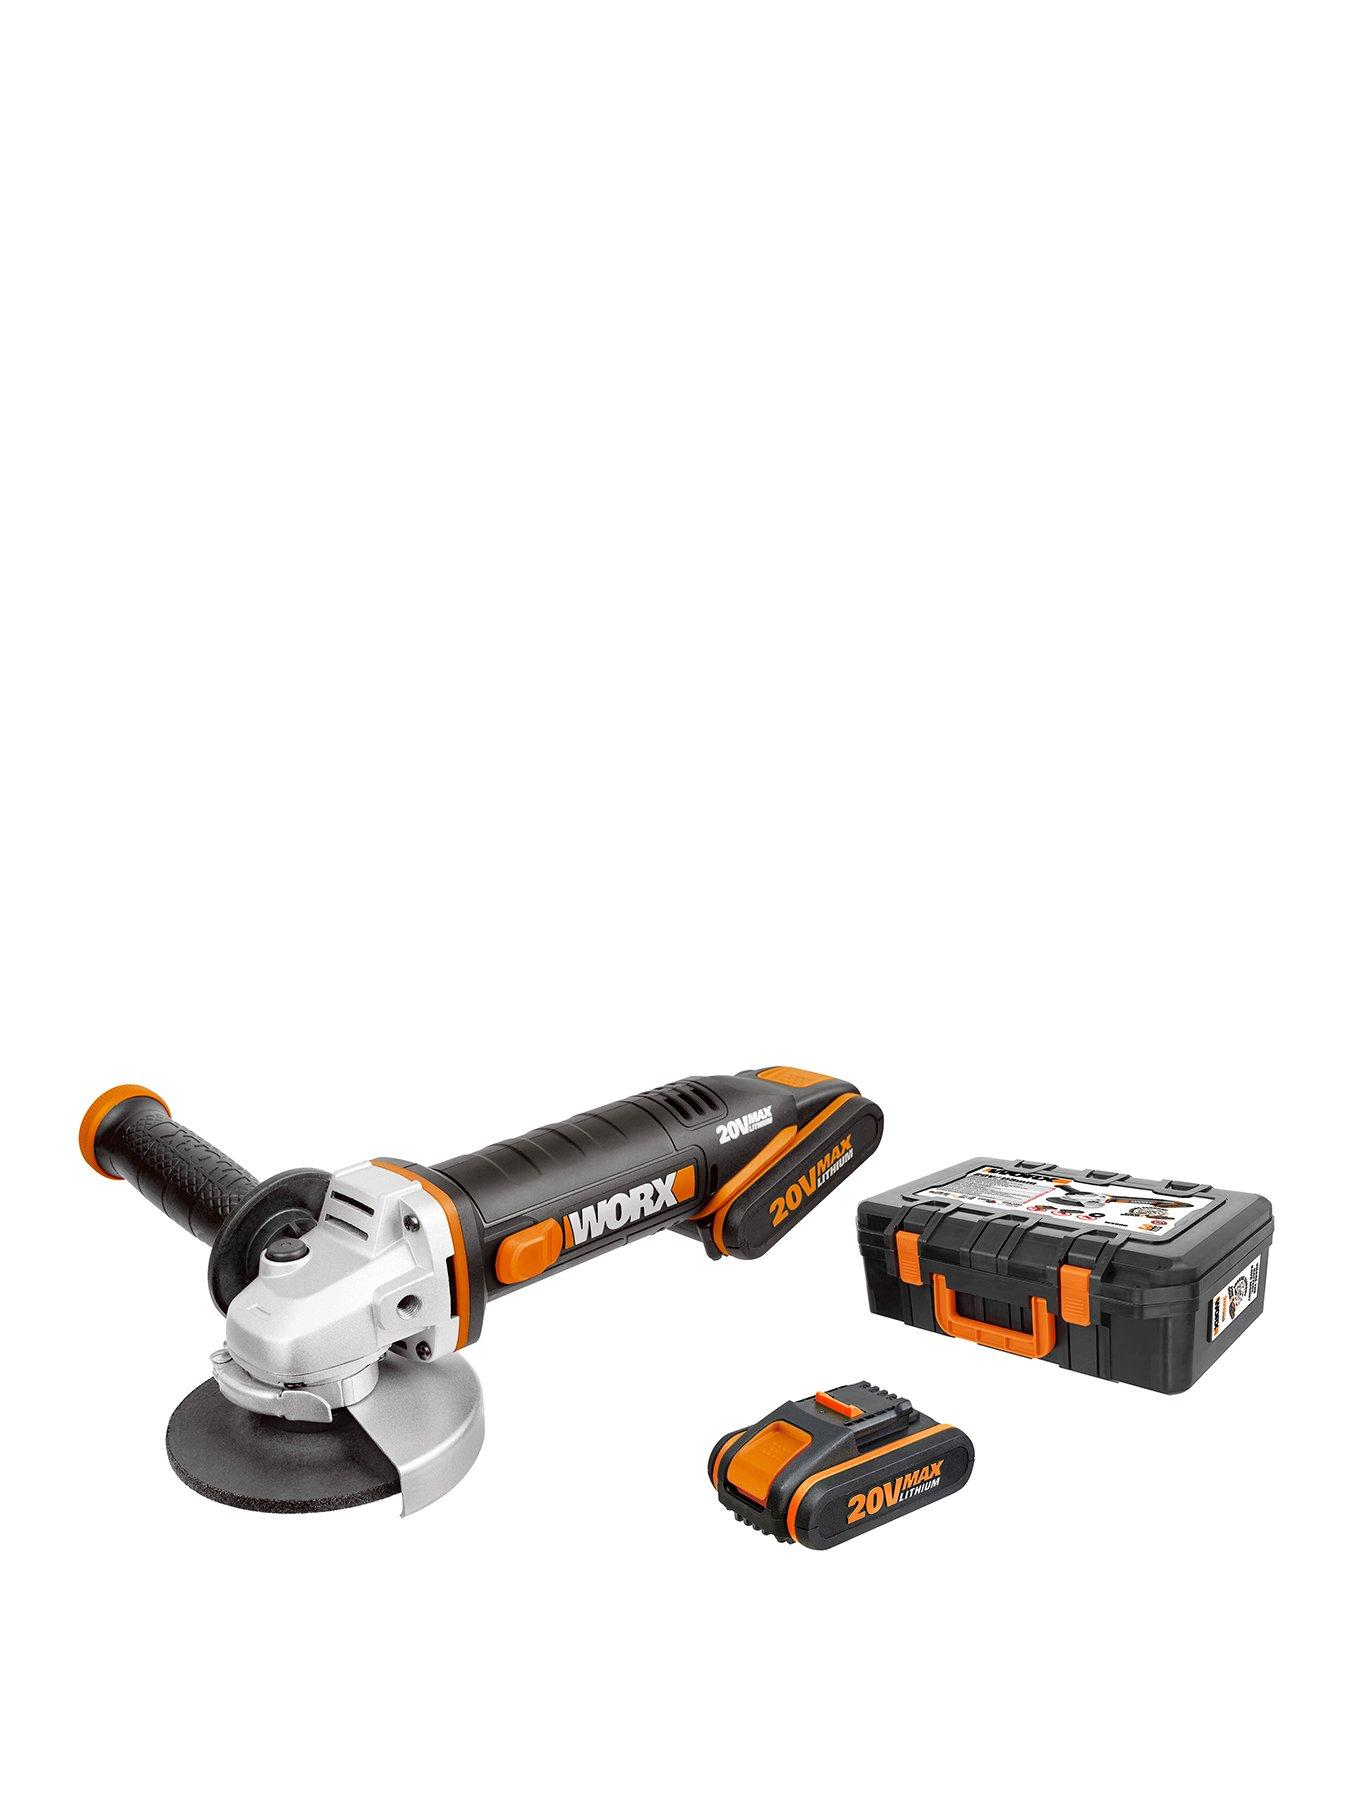 BLACK+DECKER 115mm 900W Corded Angle Grinder with Kit Box (BEG210K